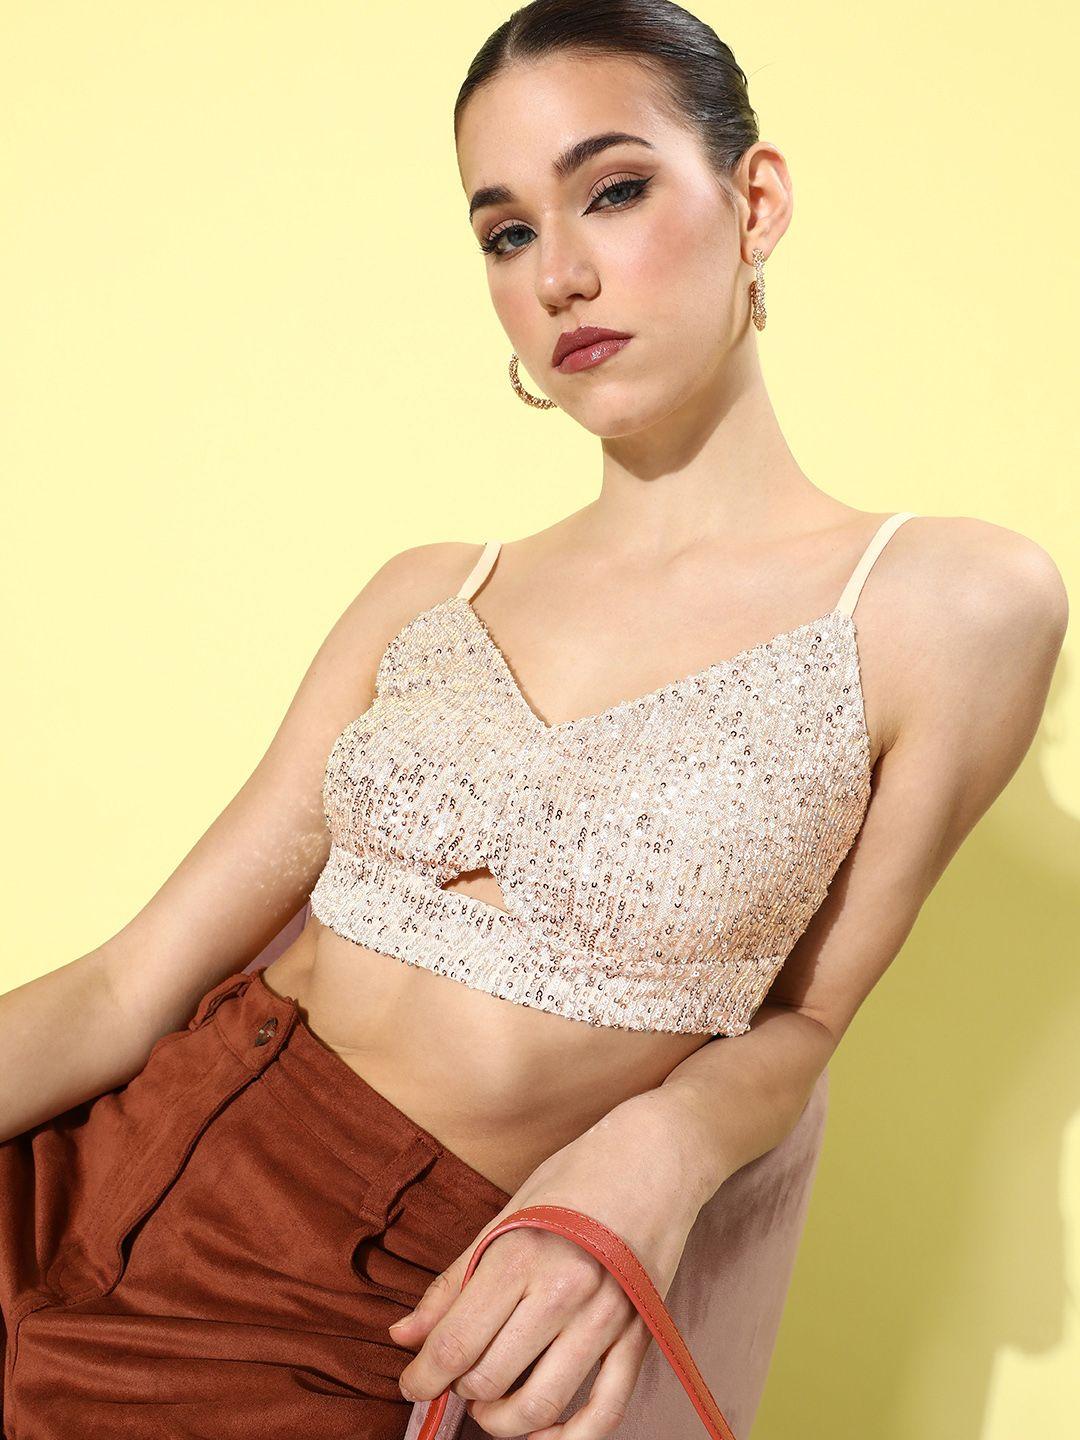 4wrd by dressberry blinky beige embellished sequined 90's hollaback bedazzeled crop top